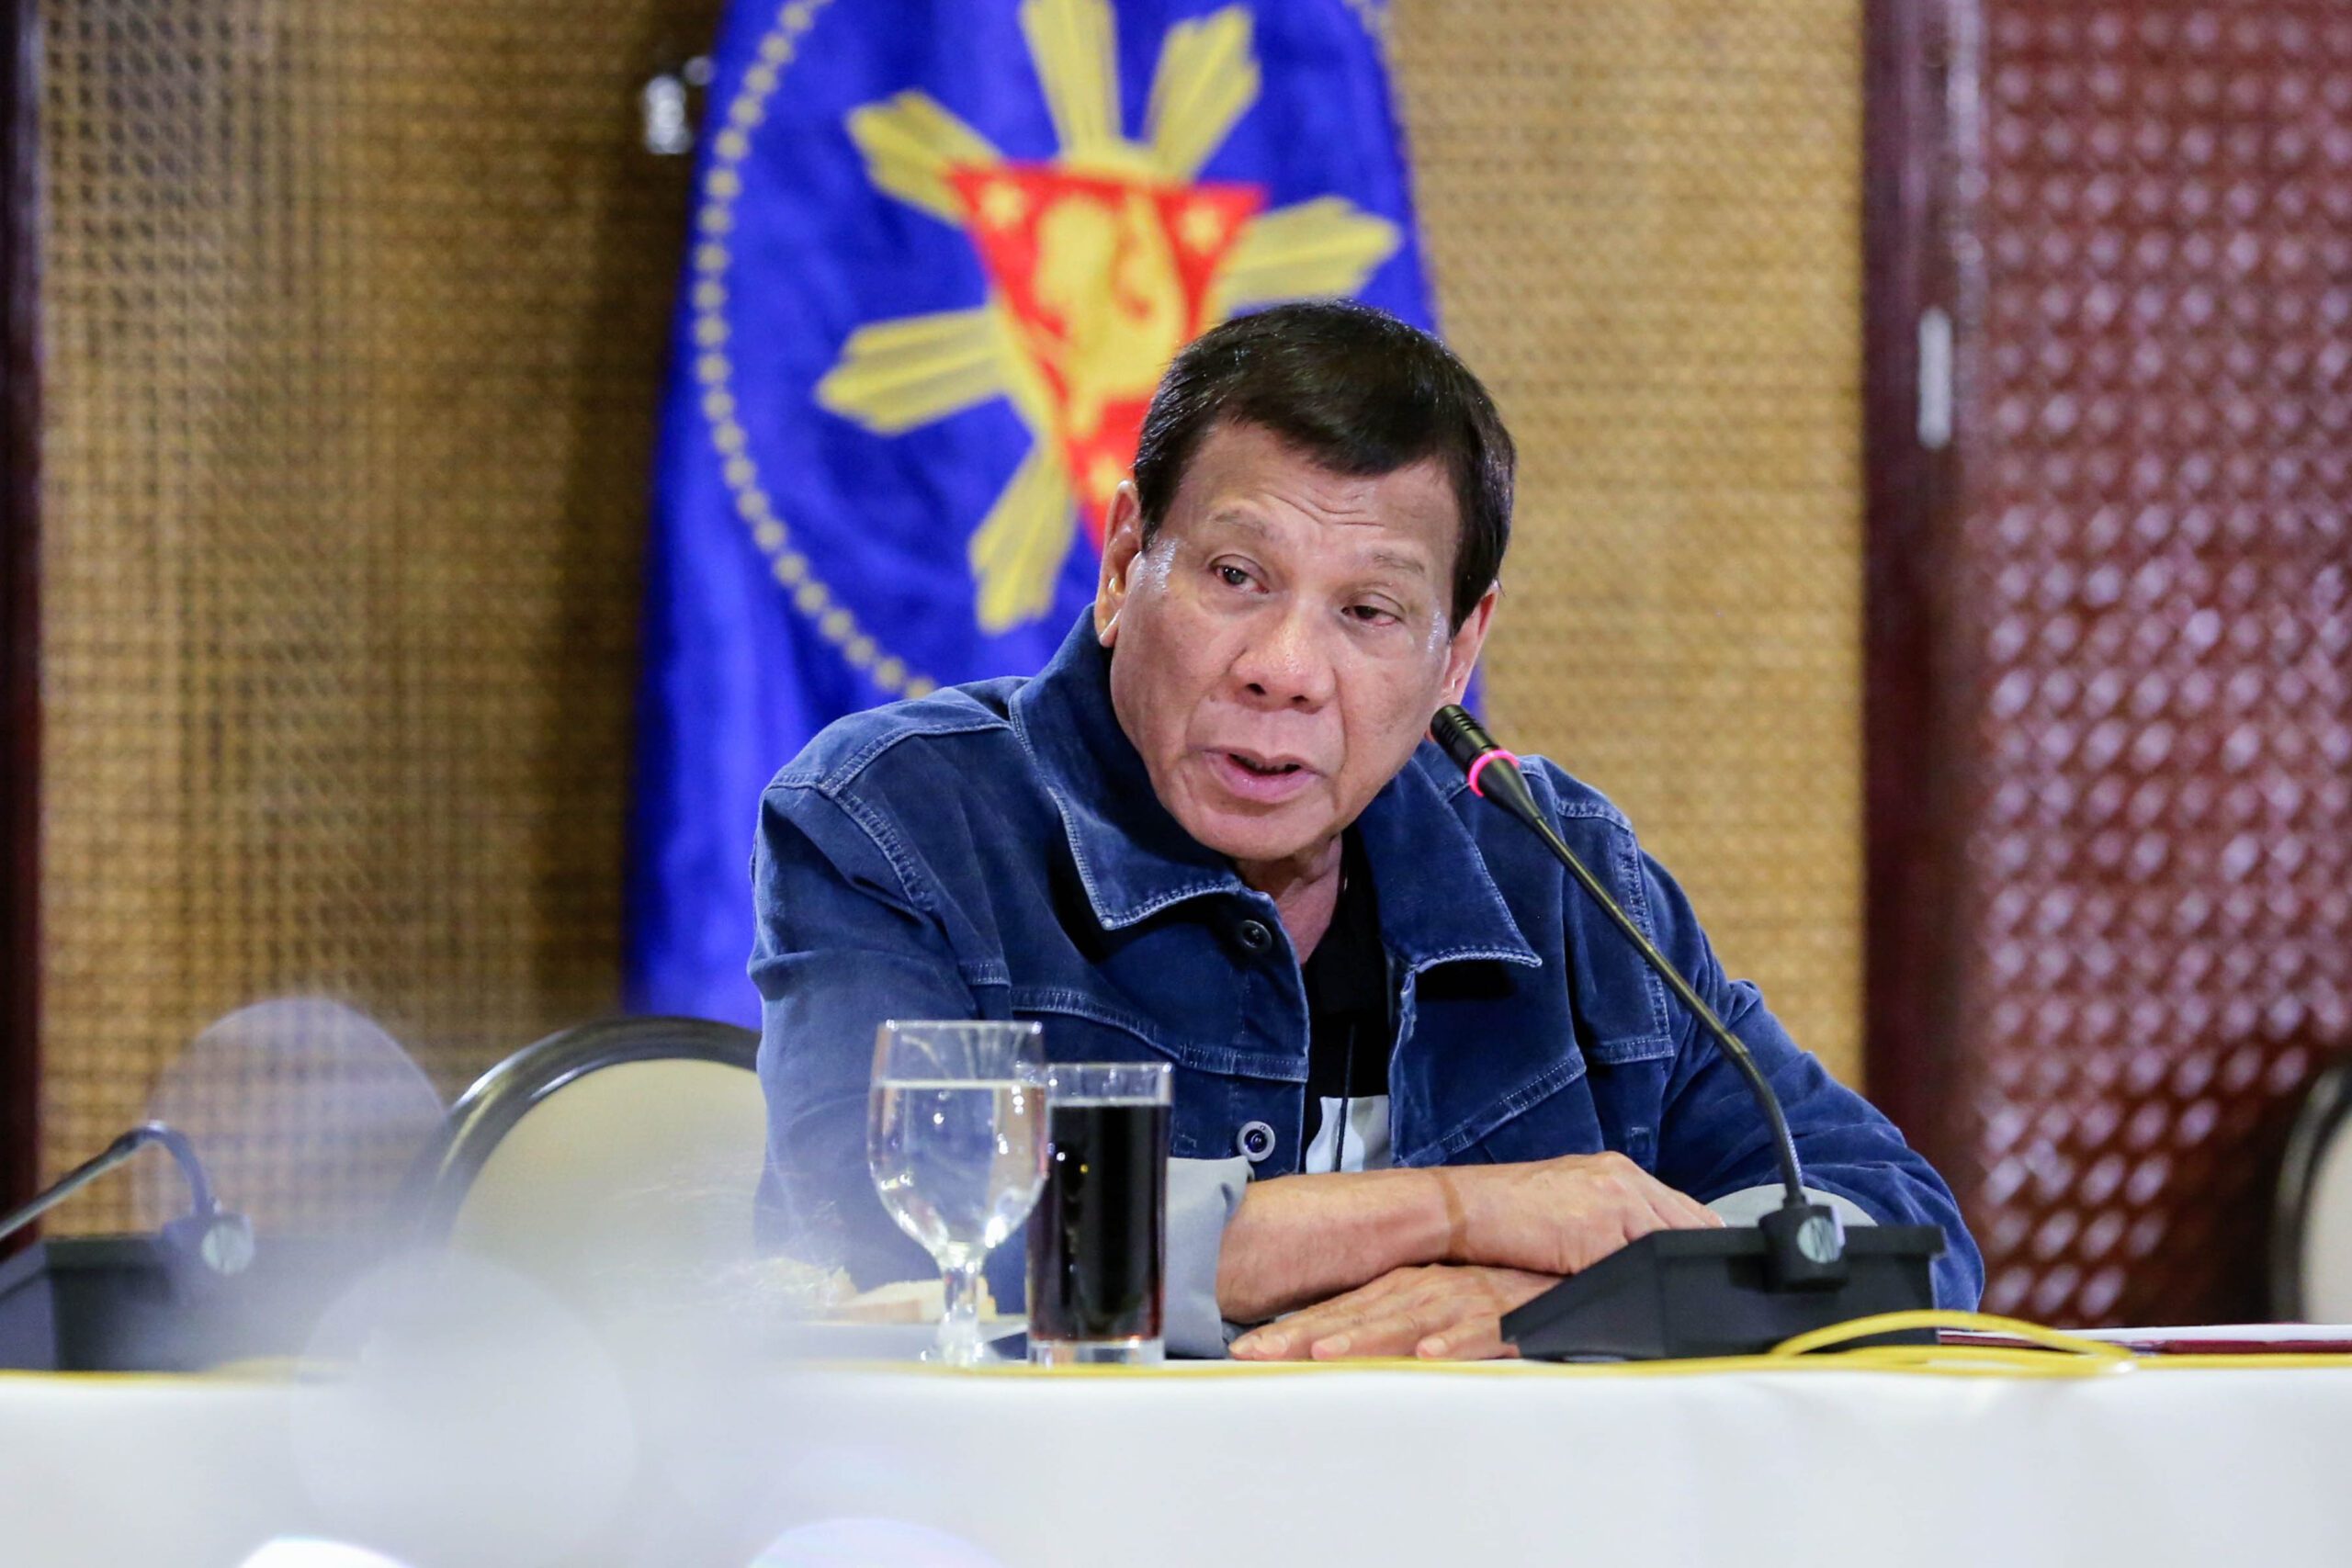 Special powers bill to deal with coronavirus now up for Duterte’s signature